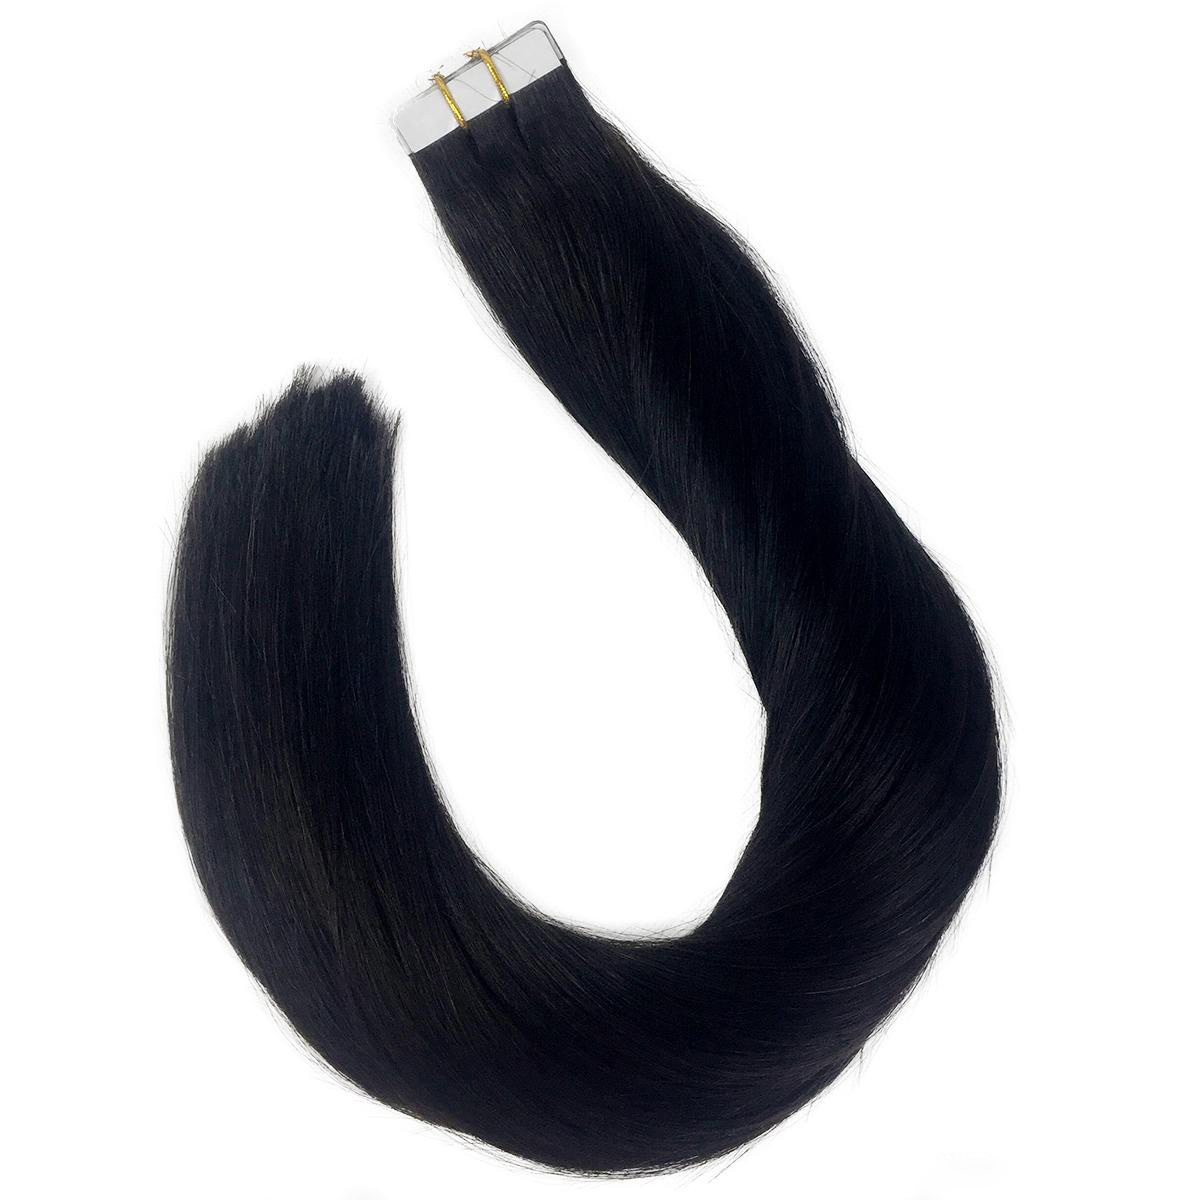 
Tape in Hair Extensions Removal